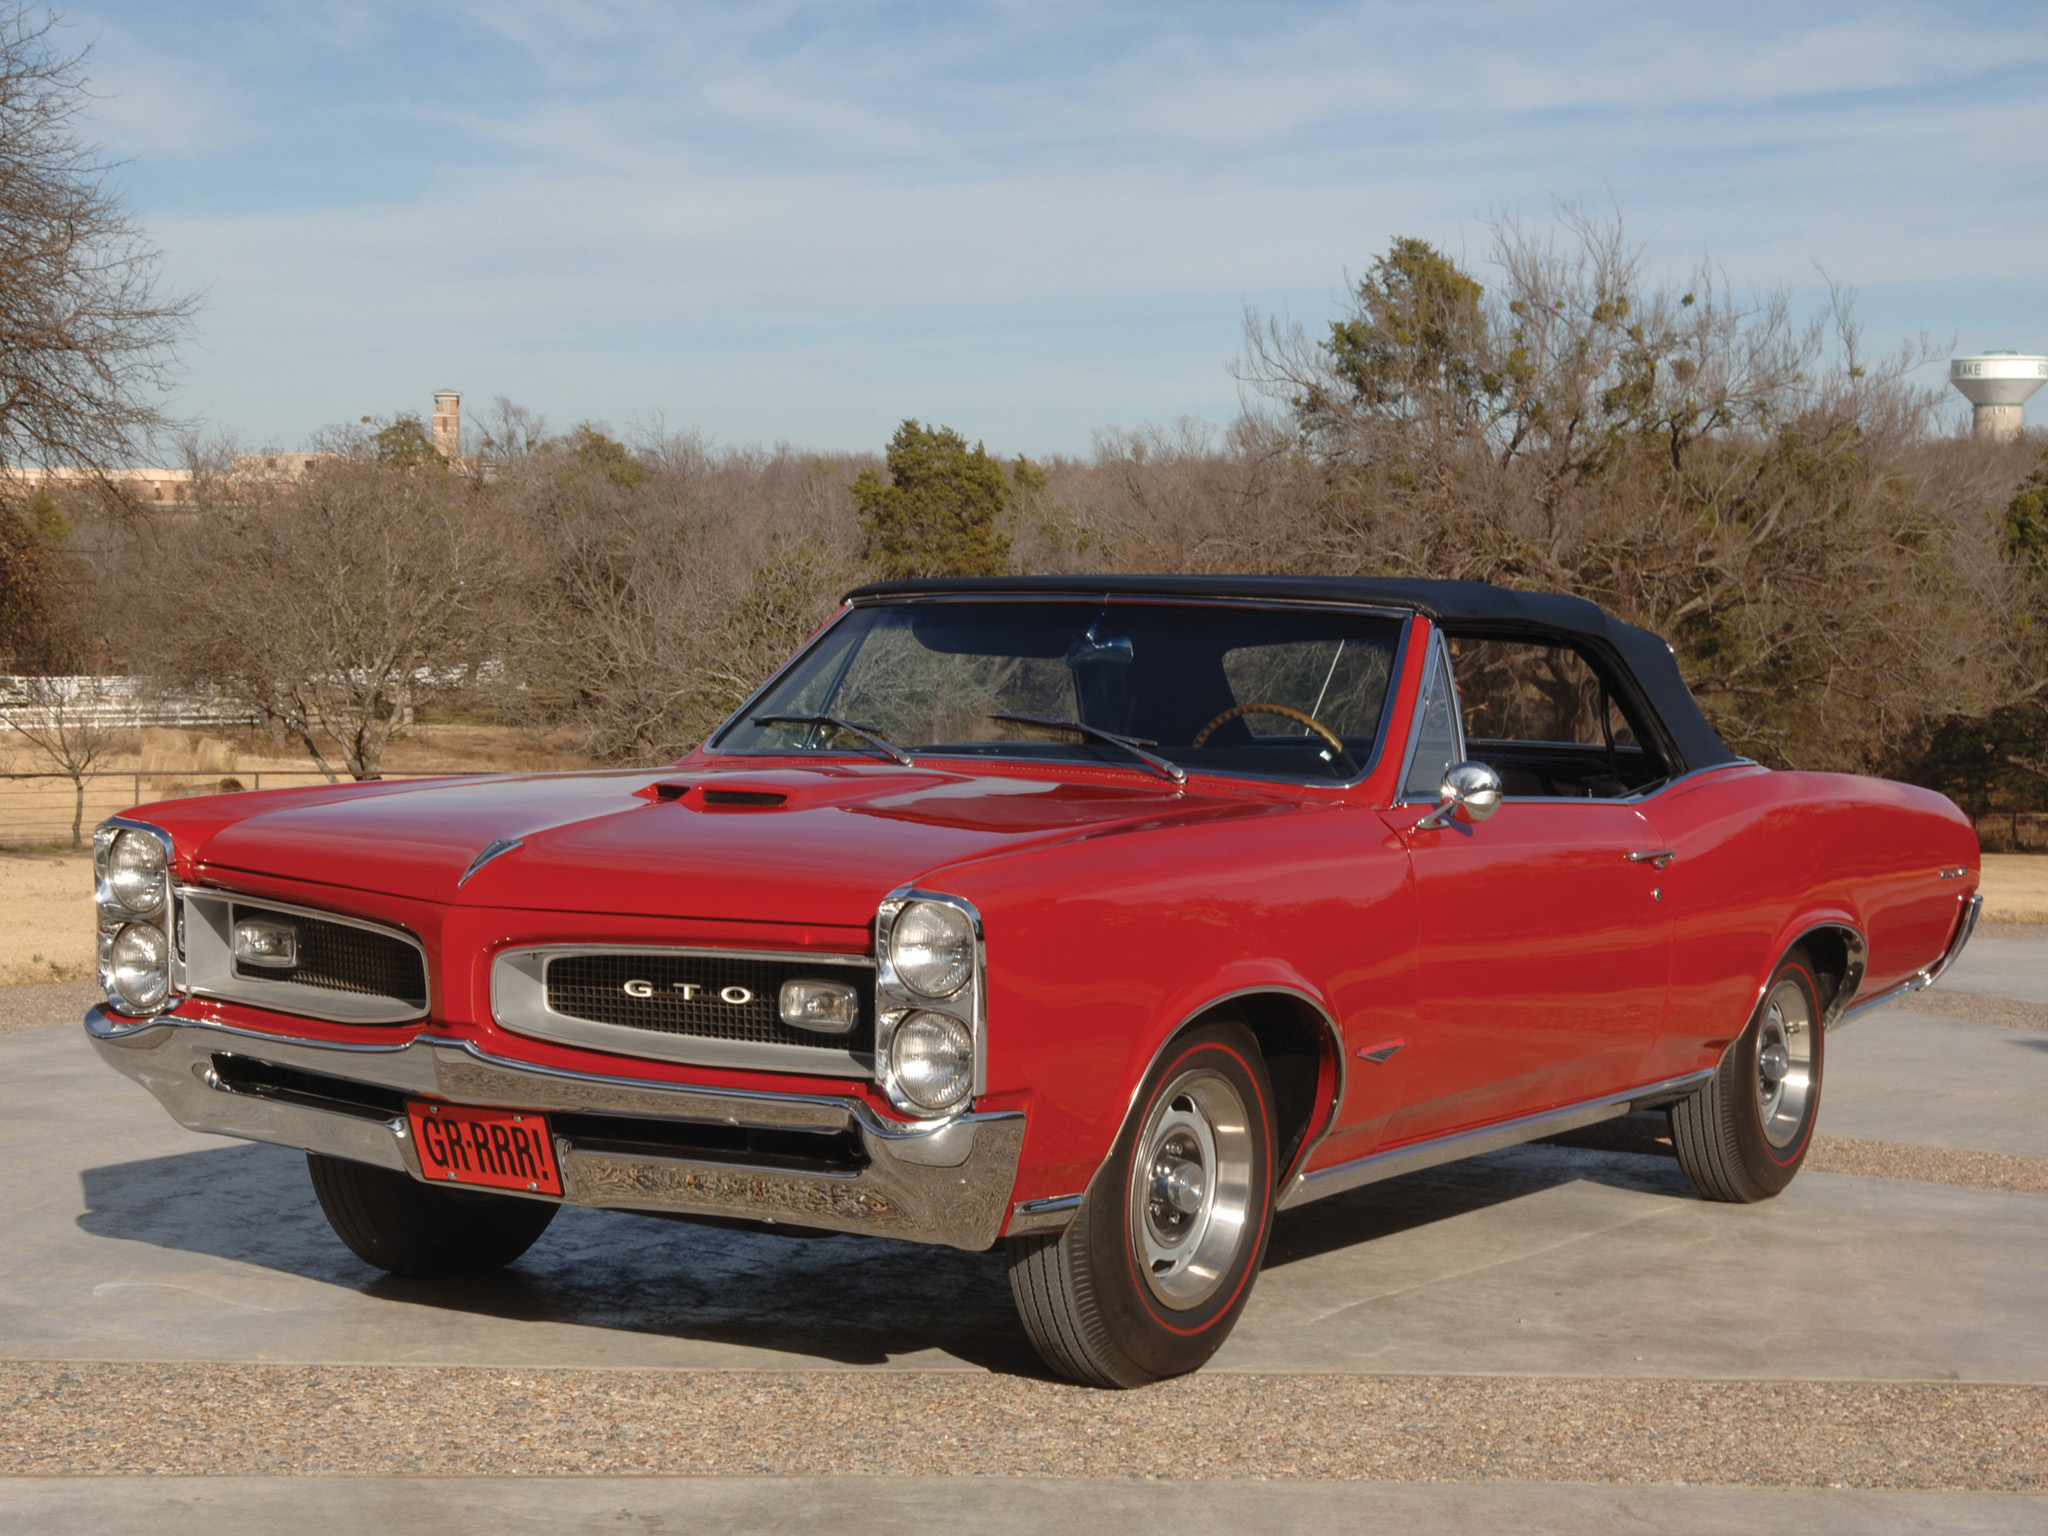 1966, Pontiac, Tempest, Gto, Convertible, Muscle, Classic Wallpaper